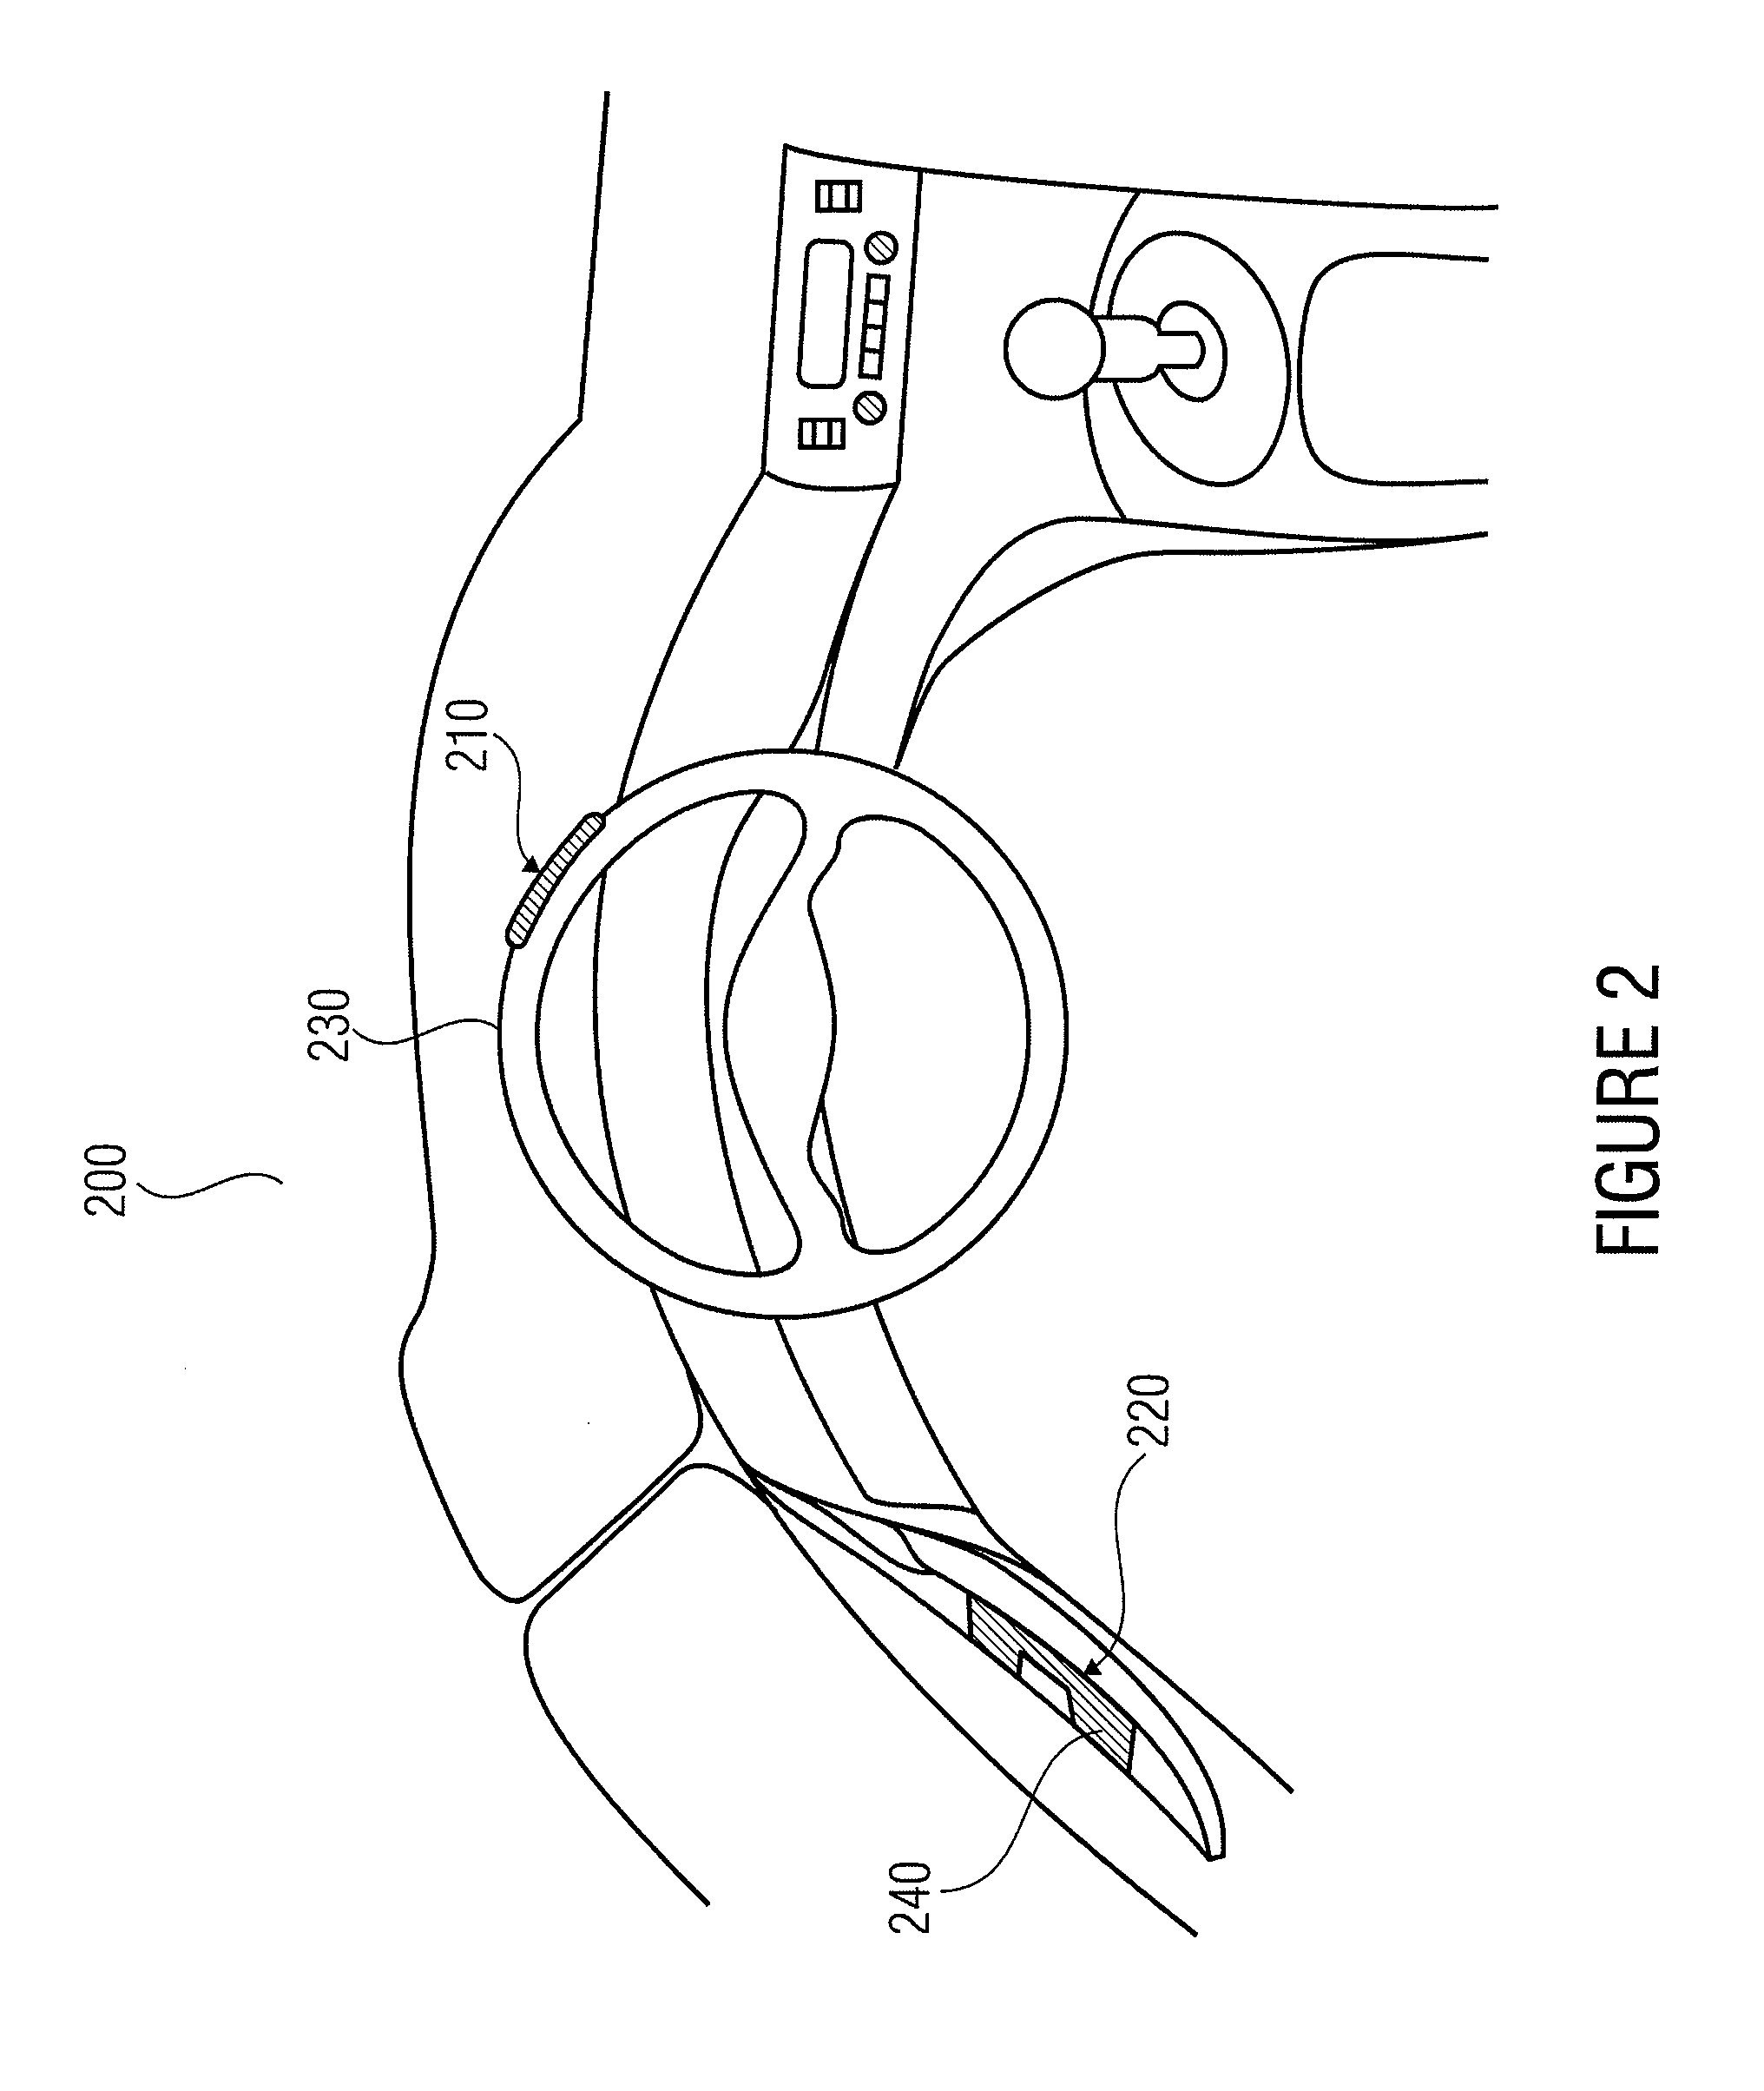 Signal detecting device for detecting a difference signal for an electrical measurement of a vital parameter of a living being, electrode arrangement and method